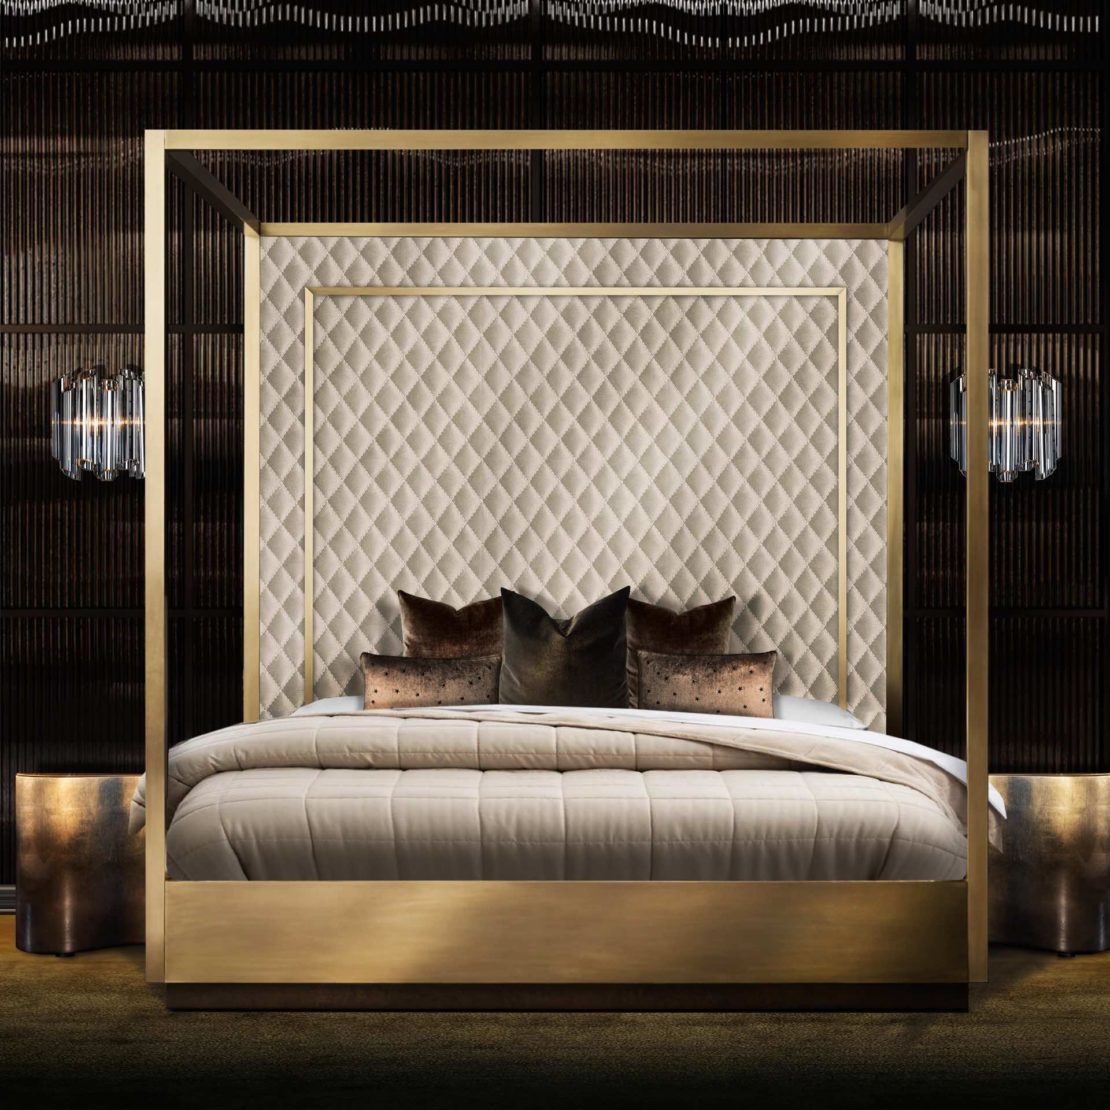 Statement Gold Finish Four Poster Bed